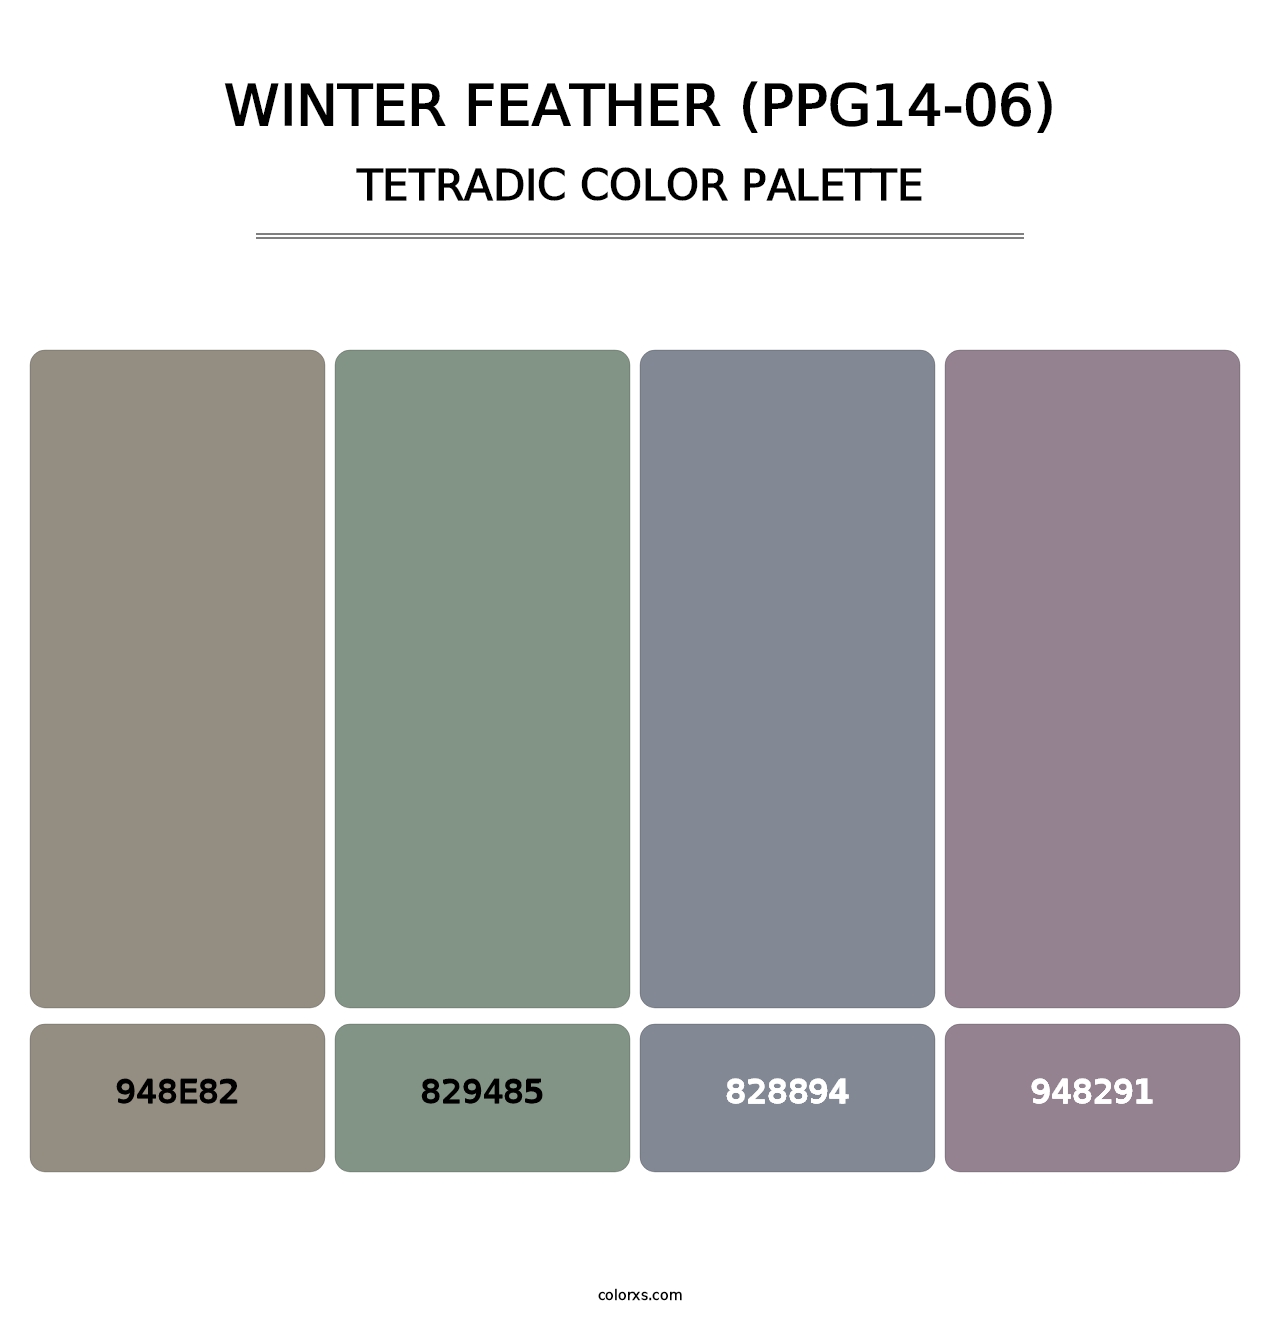 Winter Feather (PPG14-06) - Tetradic Color Palette